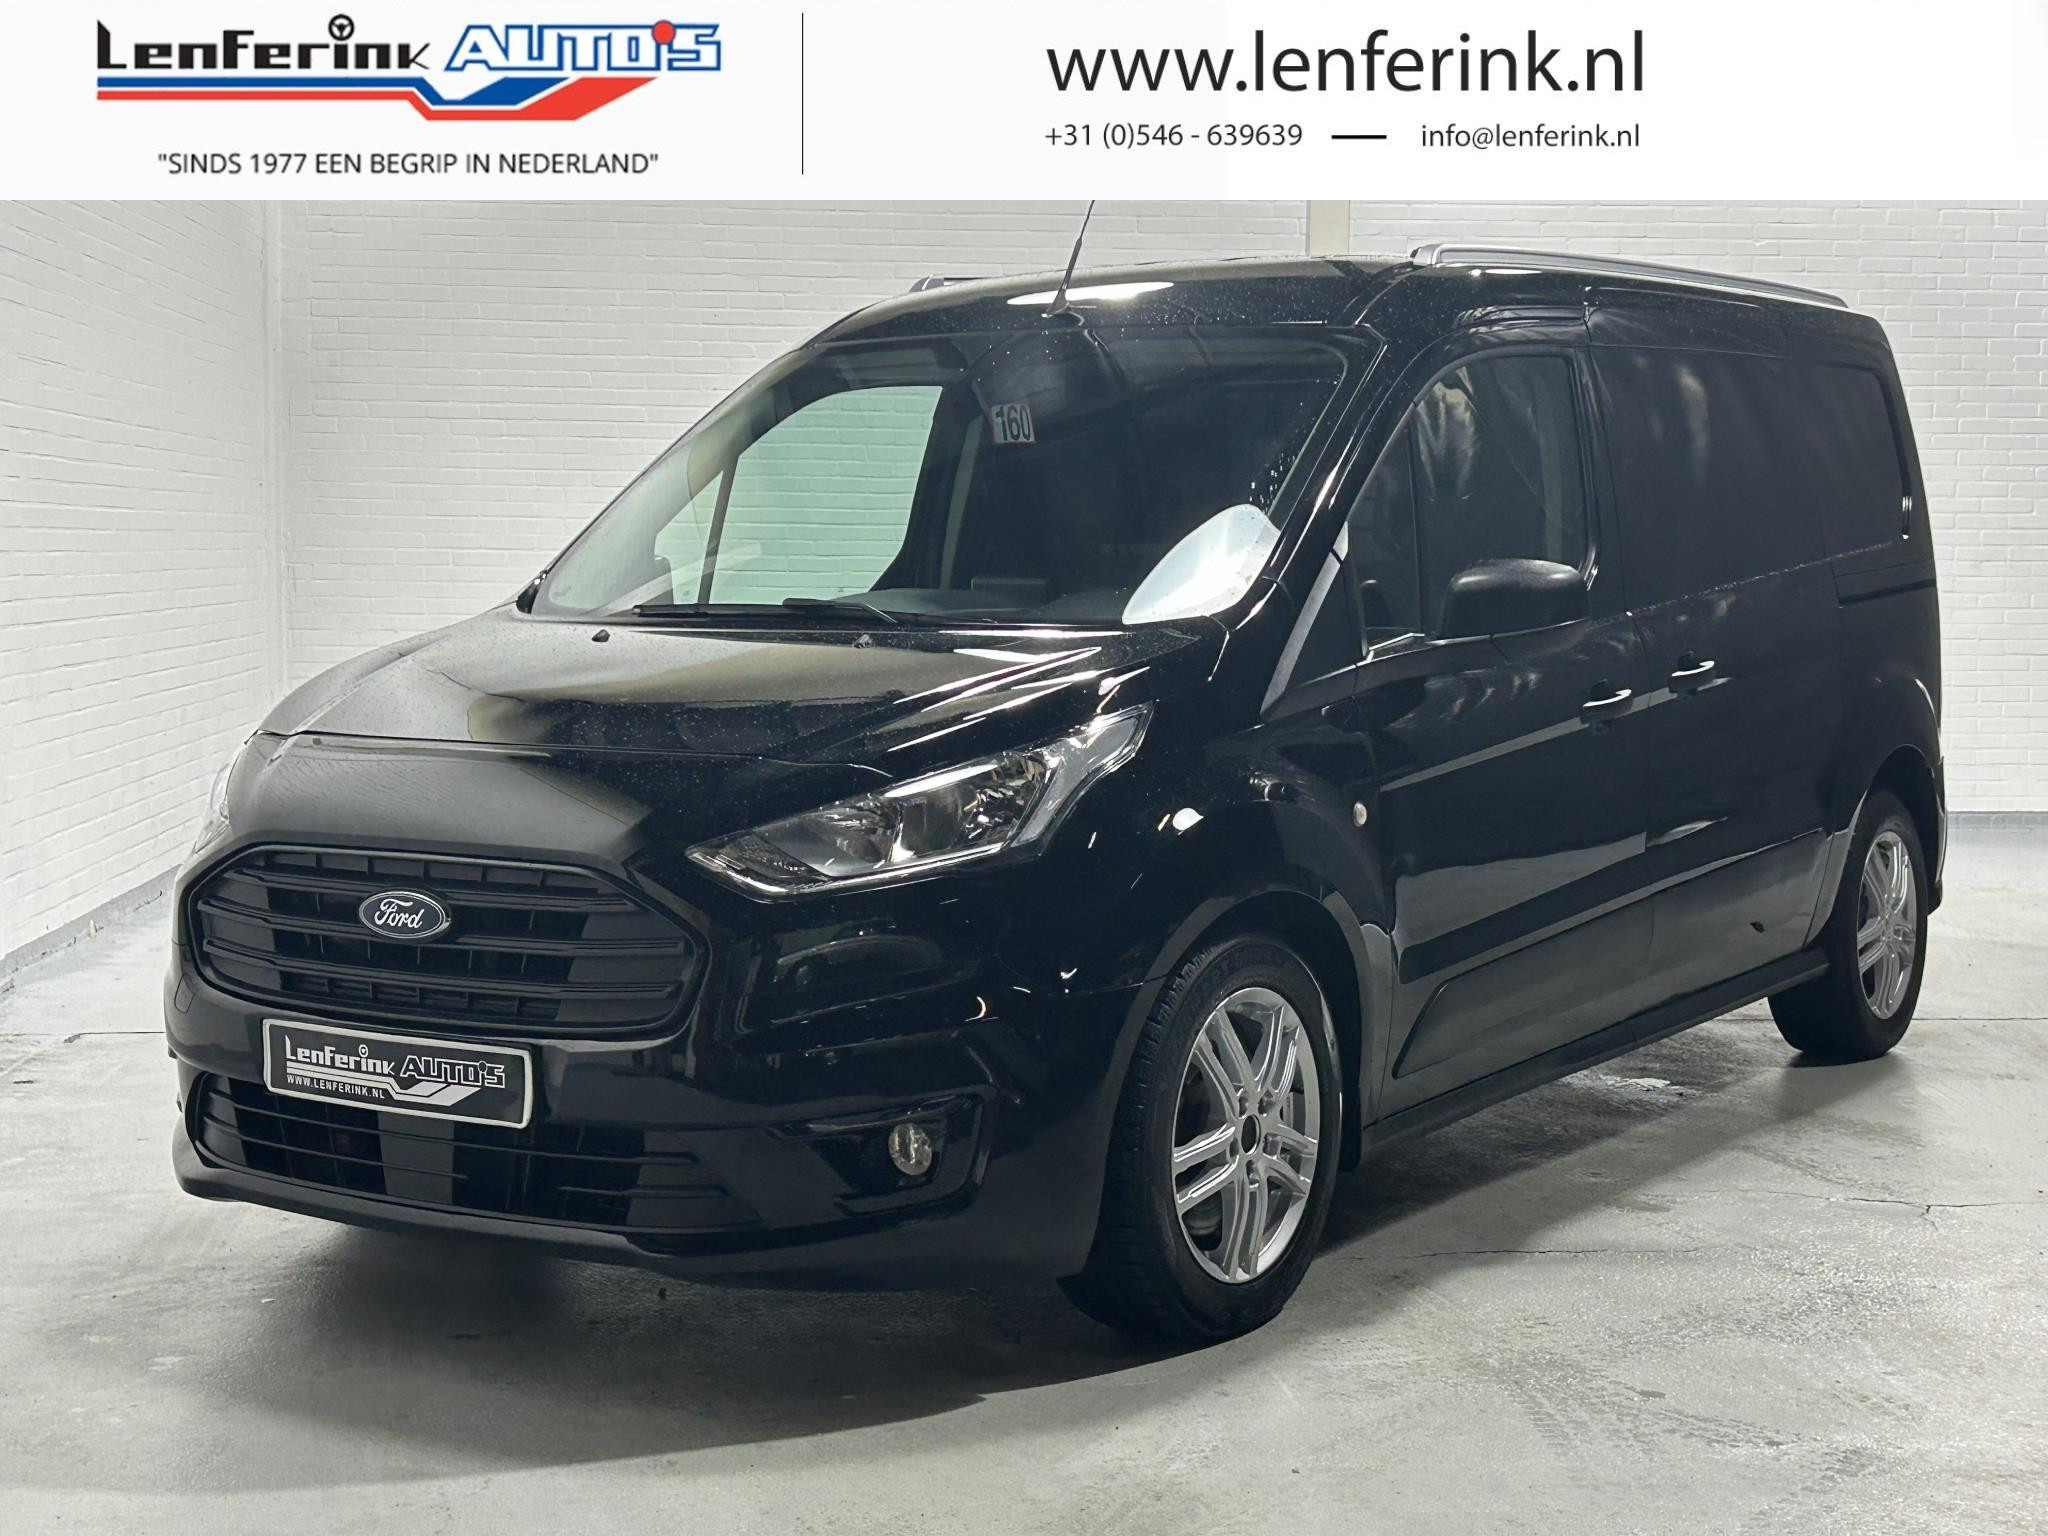 Ford Transit Connect 1.5d 120 pk L2 Trend Automaat Navi, 2x Schuifdeur Camera achter, Airco, Cruise Control, PDC achter, 3-Zits